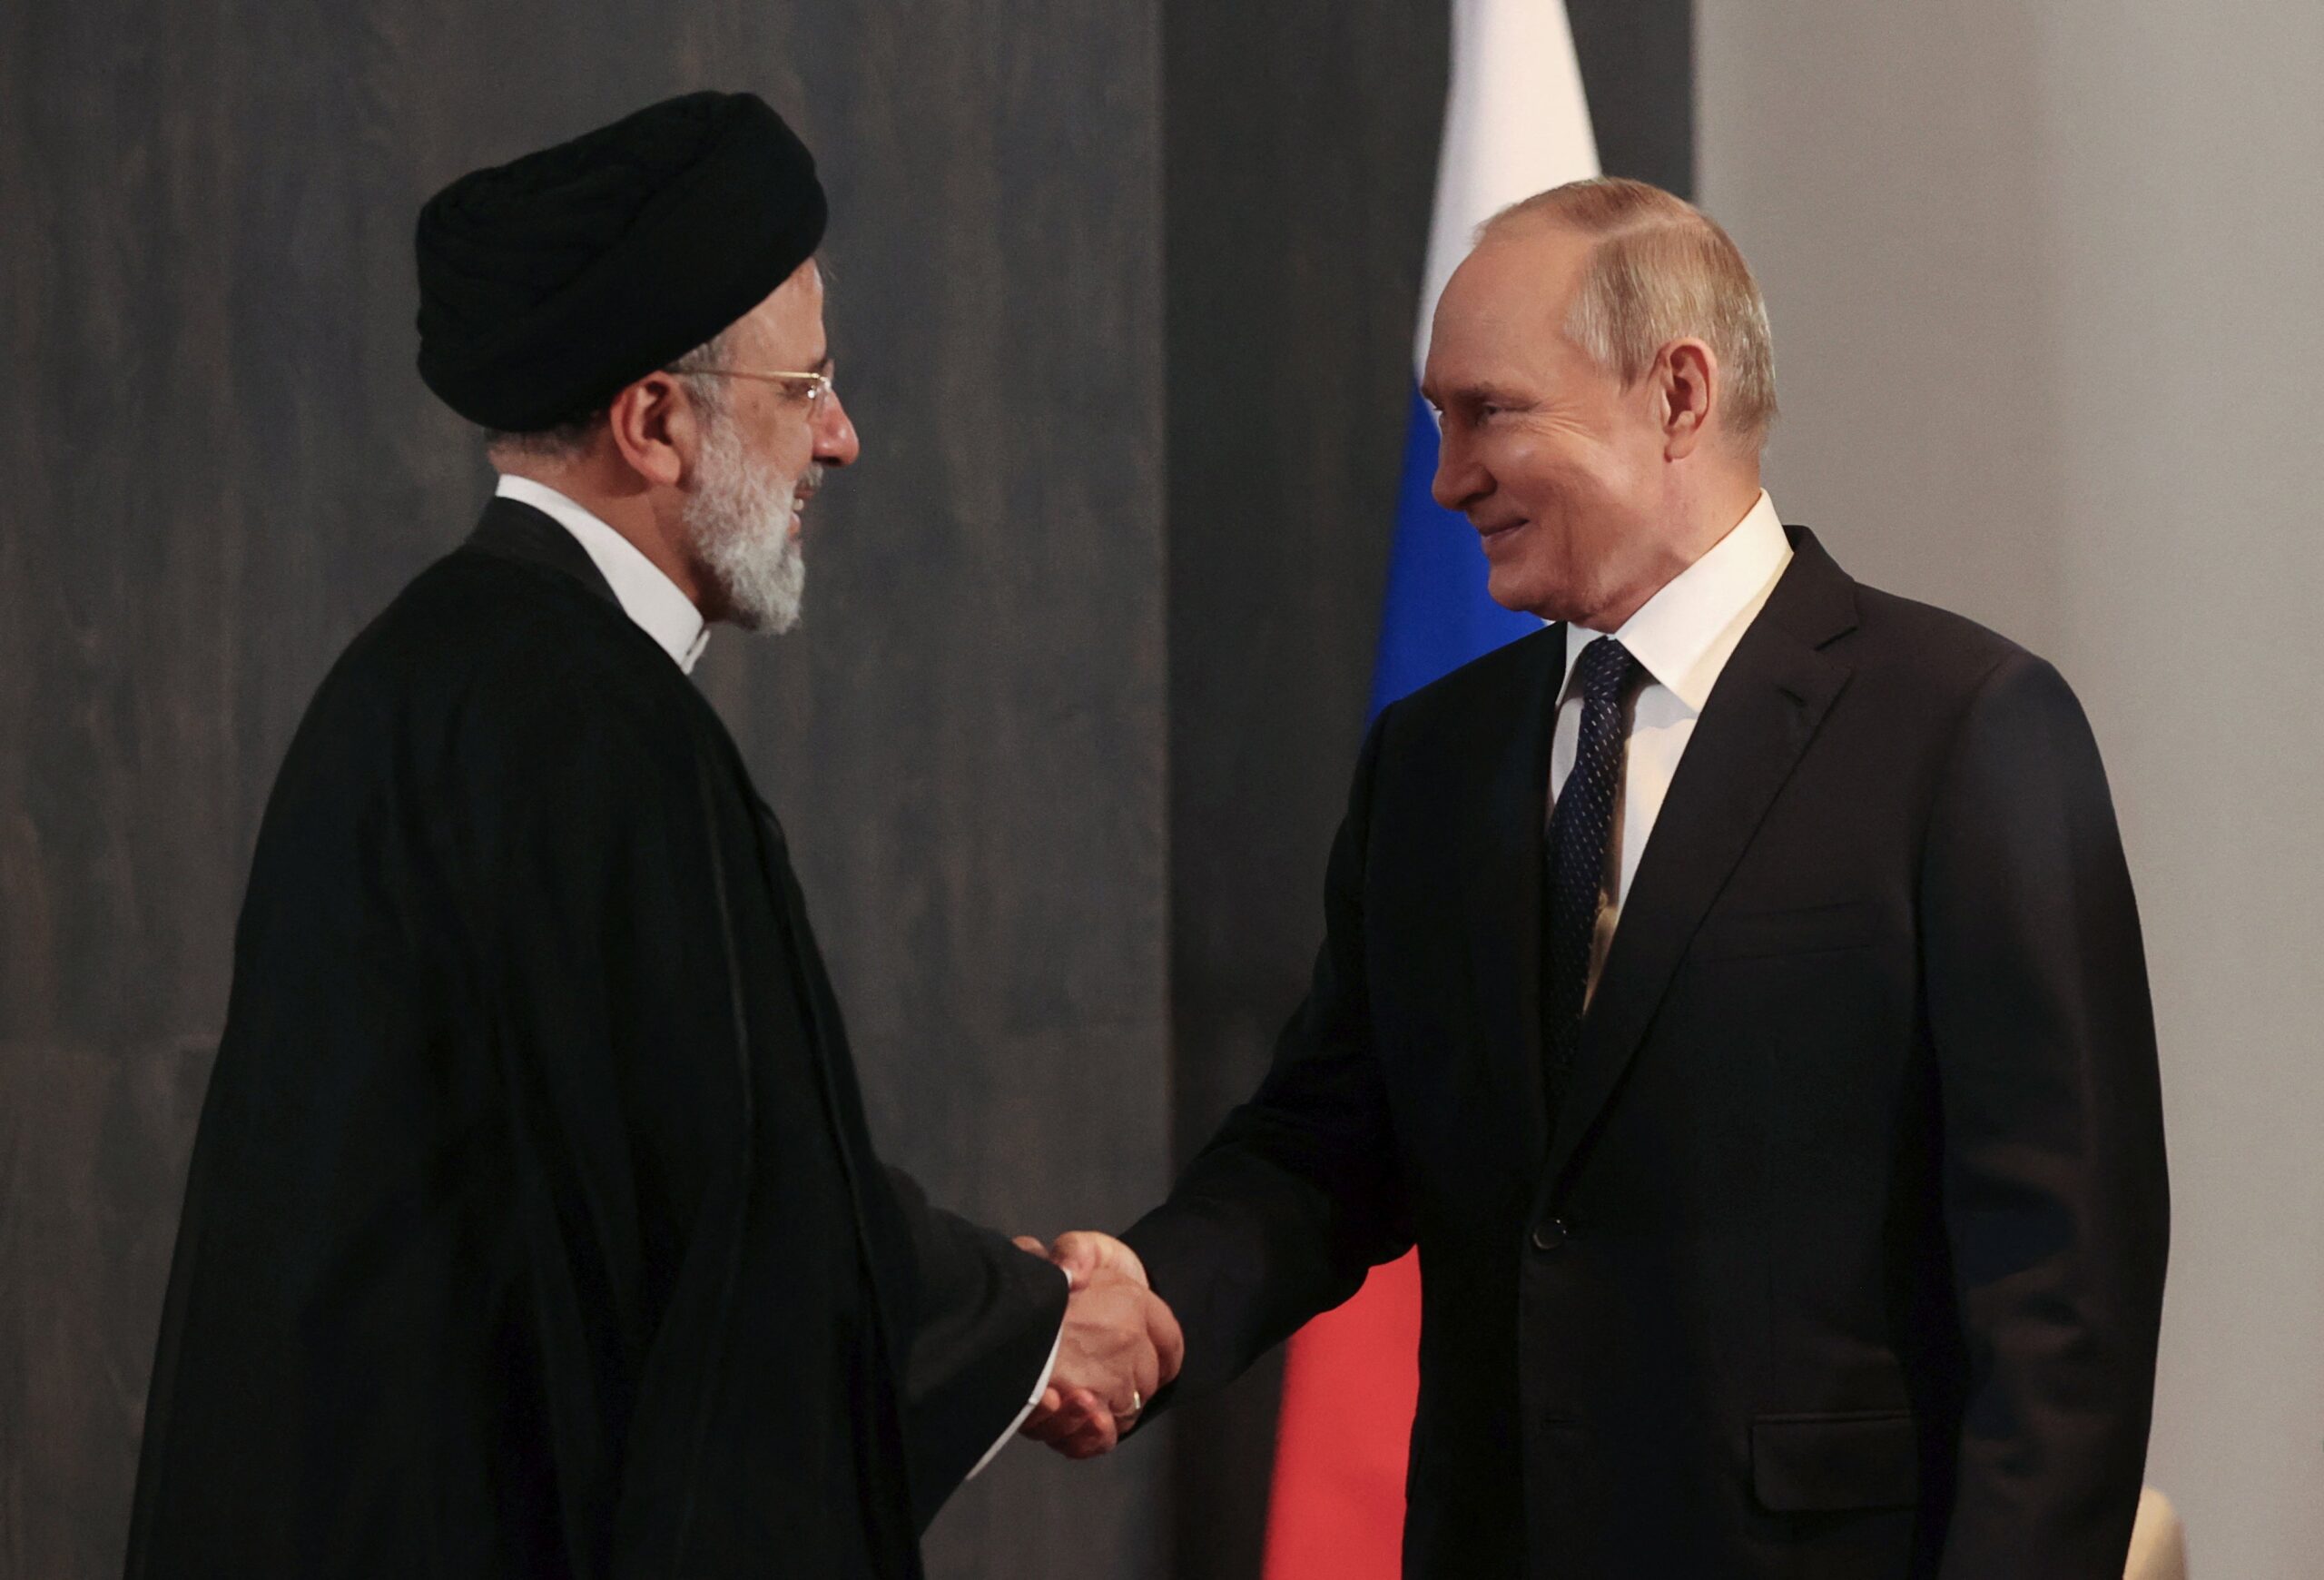 Iran to join Russia, China-led group in bid to dodge Western sanctions: report